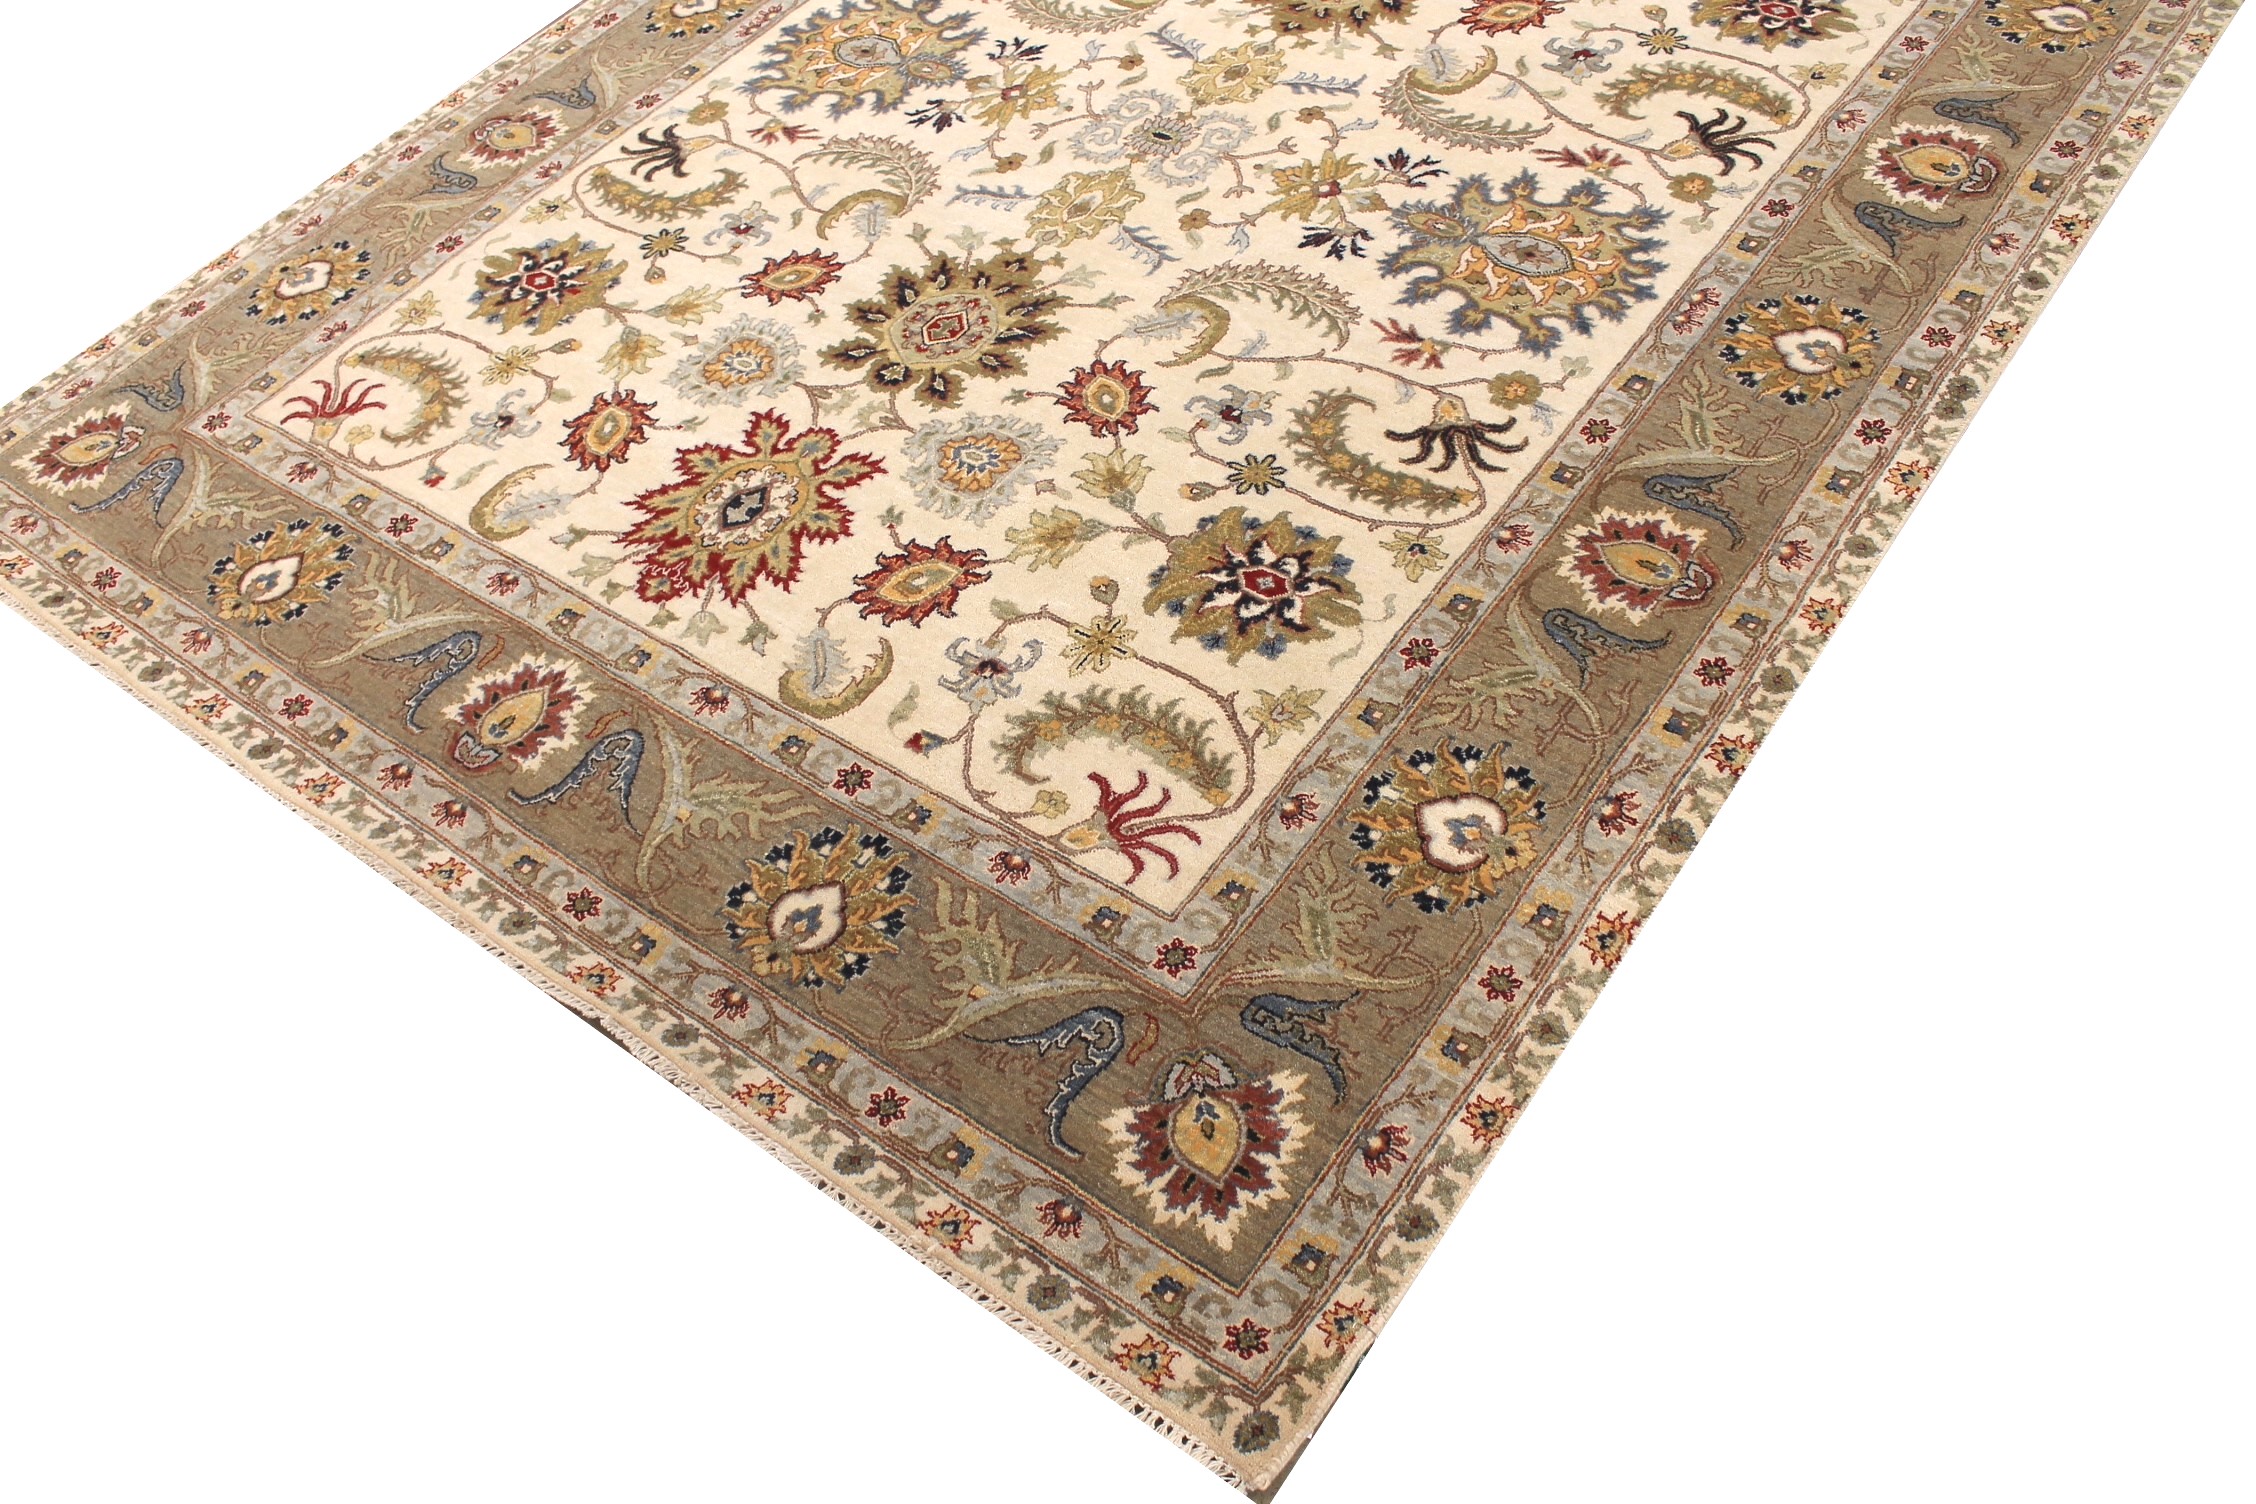 8x10 Traditional Hand Knotted Wool Area Rug - MR027960